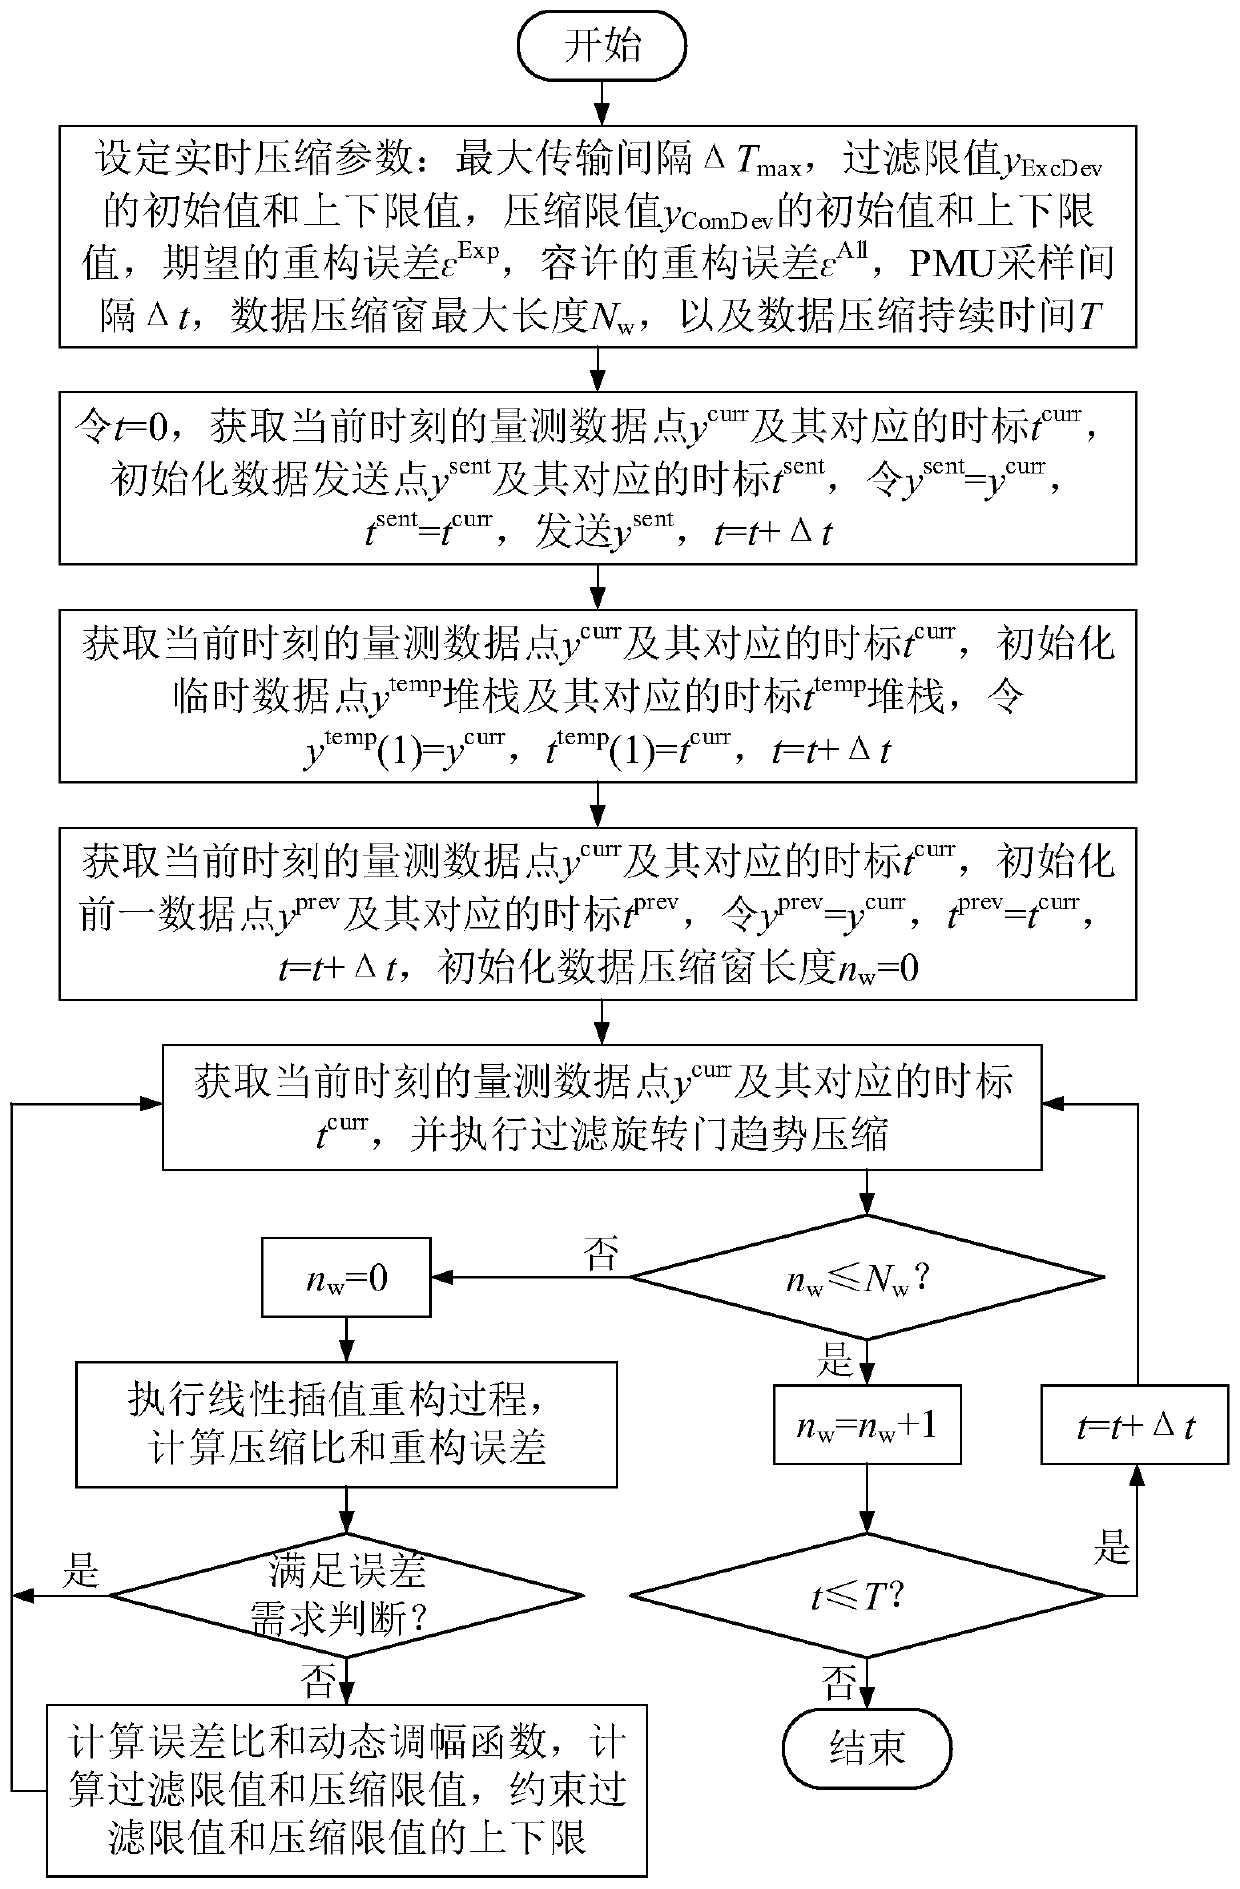 Error-adaptive power distribution network synchronous phasor measurement data real-time compression method